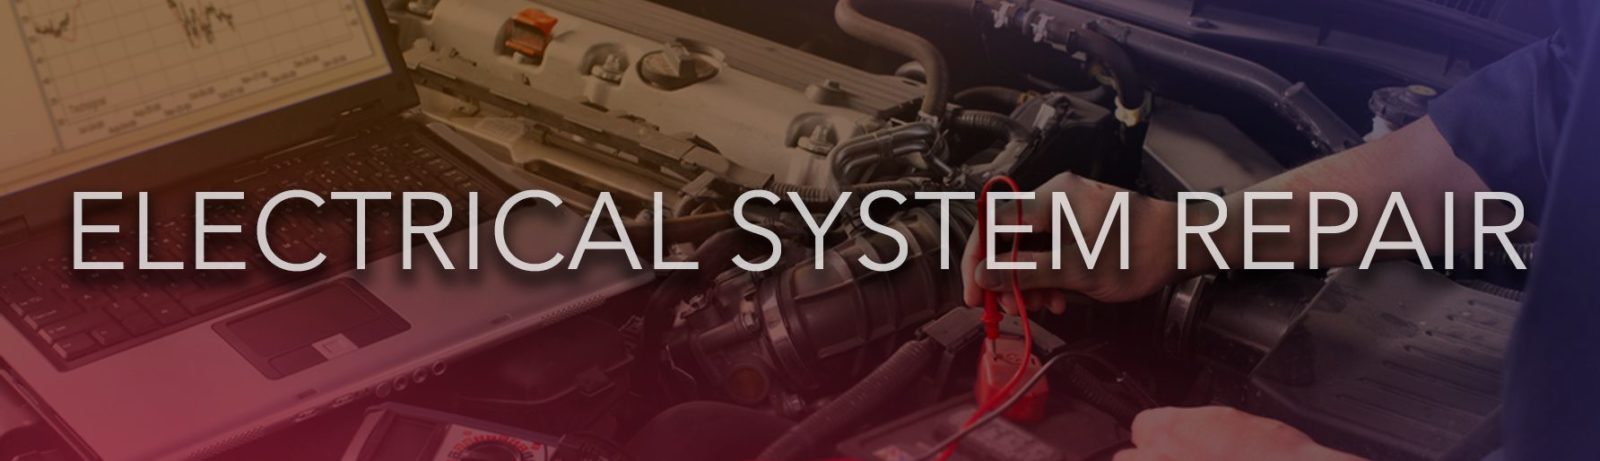 Vehicle Electrical Systems Repair At Krietz Auto